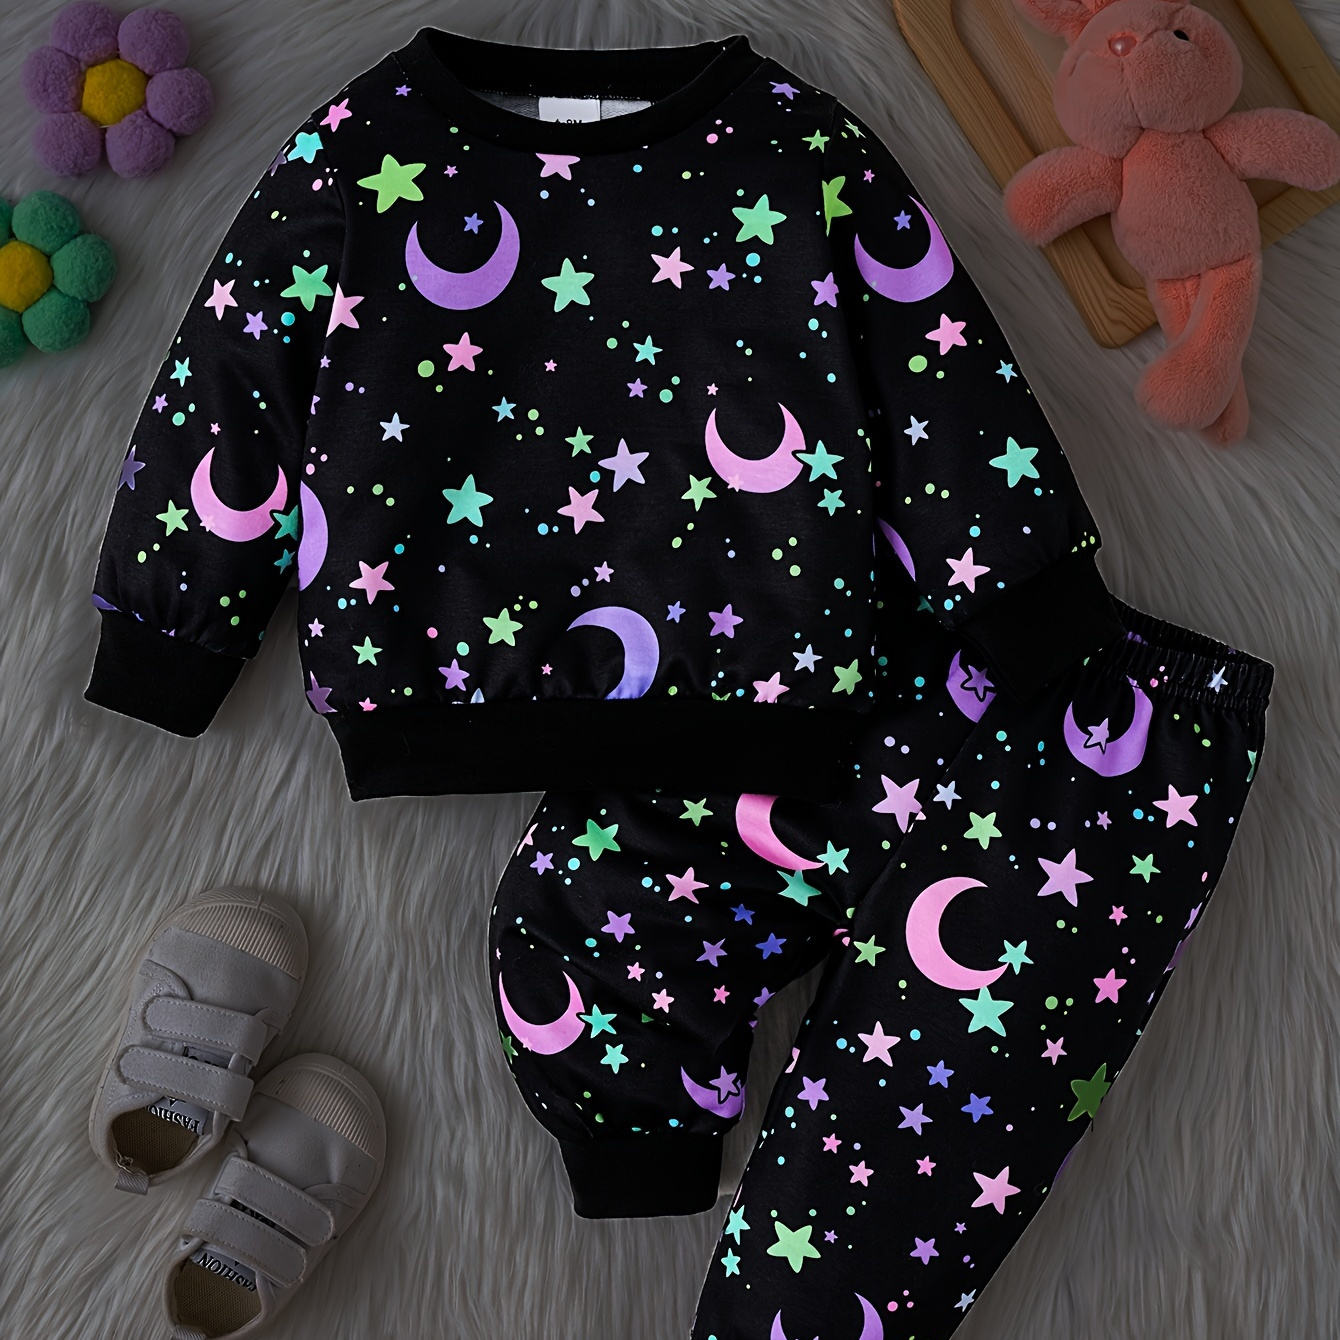 

Baby Fluorescent Star-studded Pattern Trendy Sweatshirts And Sweatpants Set, Kid's Party Hang Out Casual Clothes